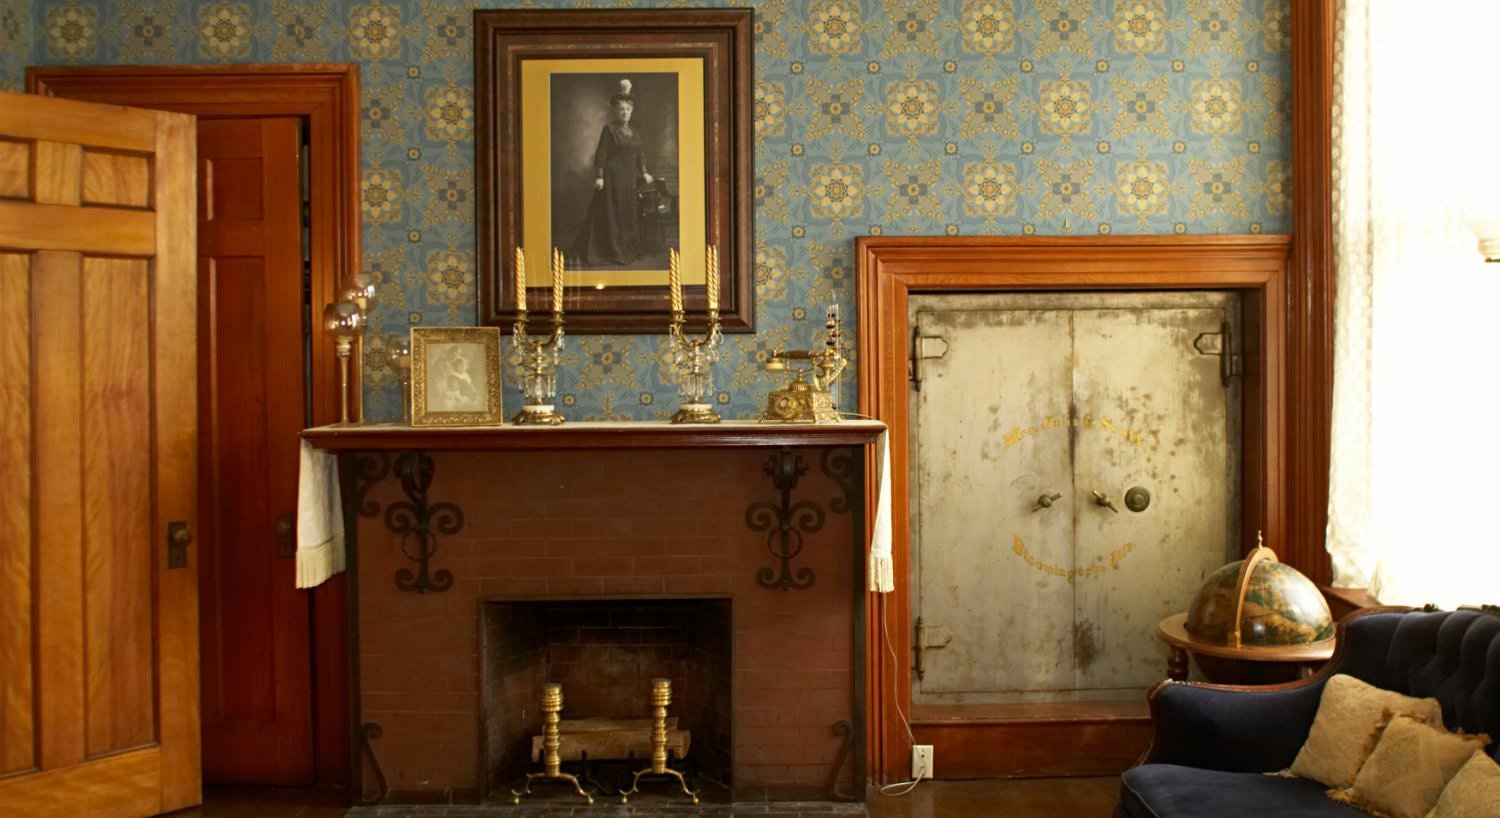 Blue papered walls, fireplace with candlesticks on the mantel and small heavy door leading to a safe room